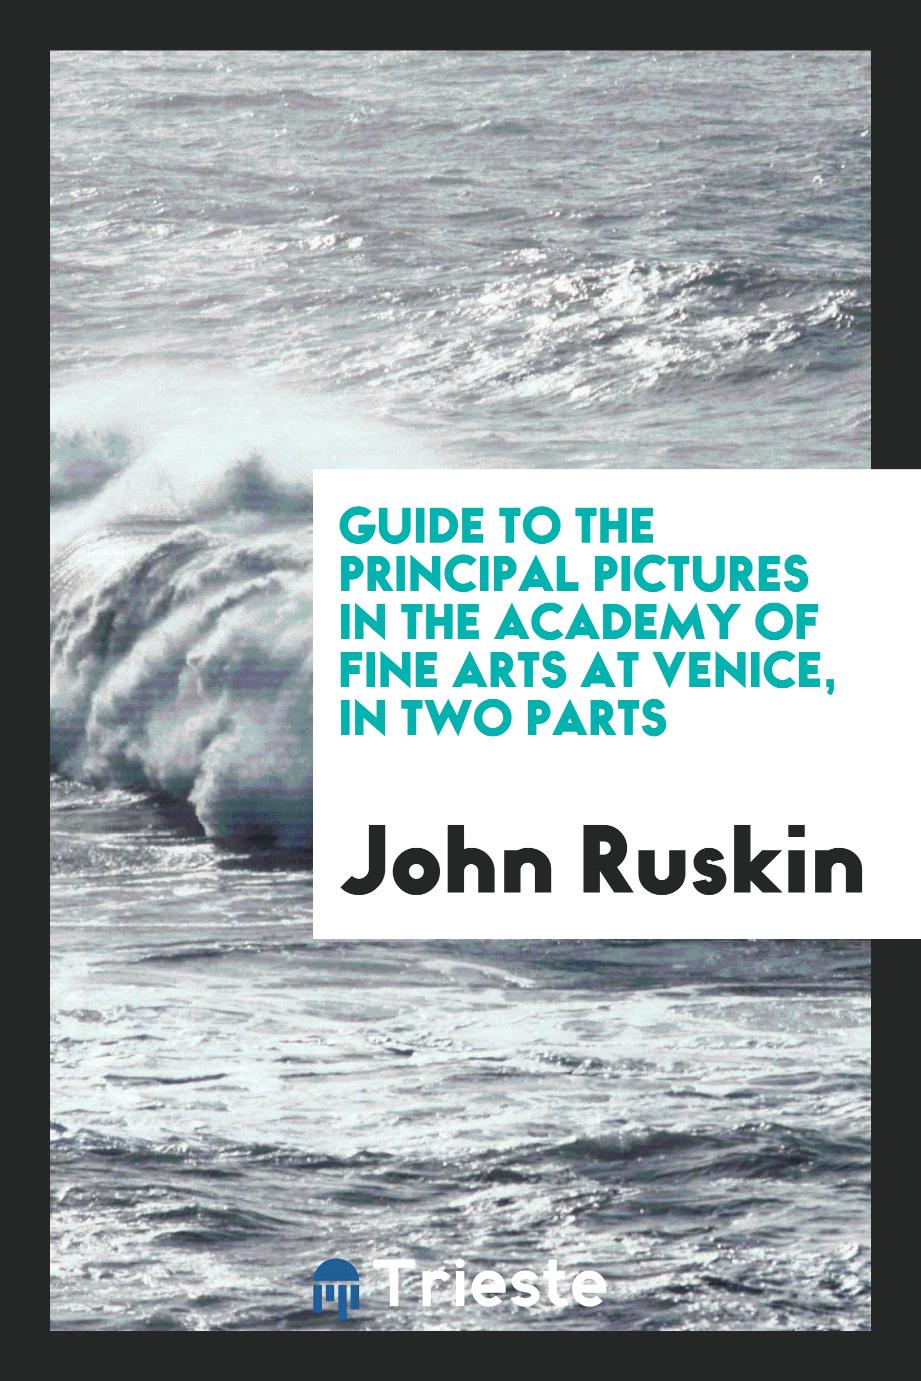 Guide to the principal pictures in the Academy of fine arts at Venice, in two parts